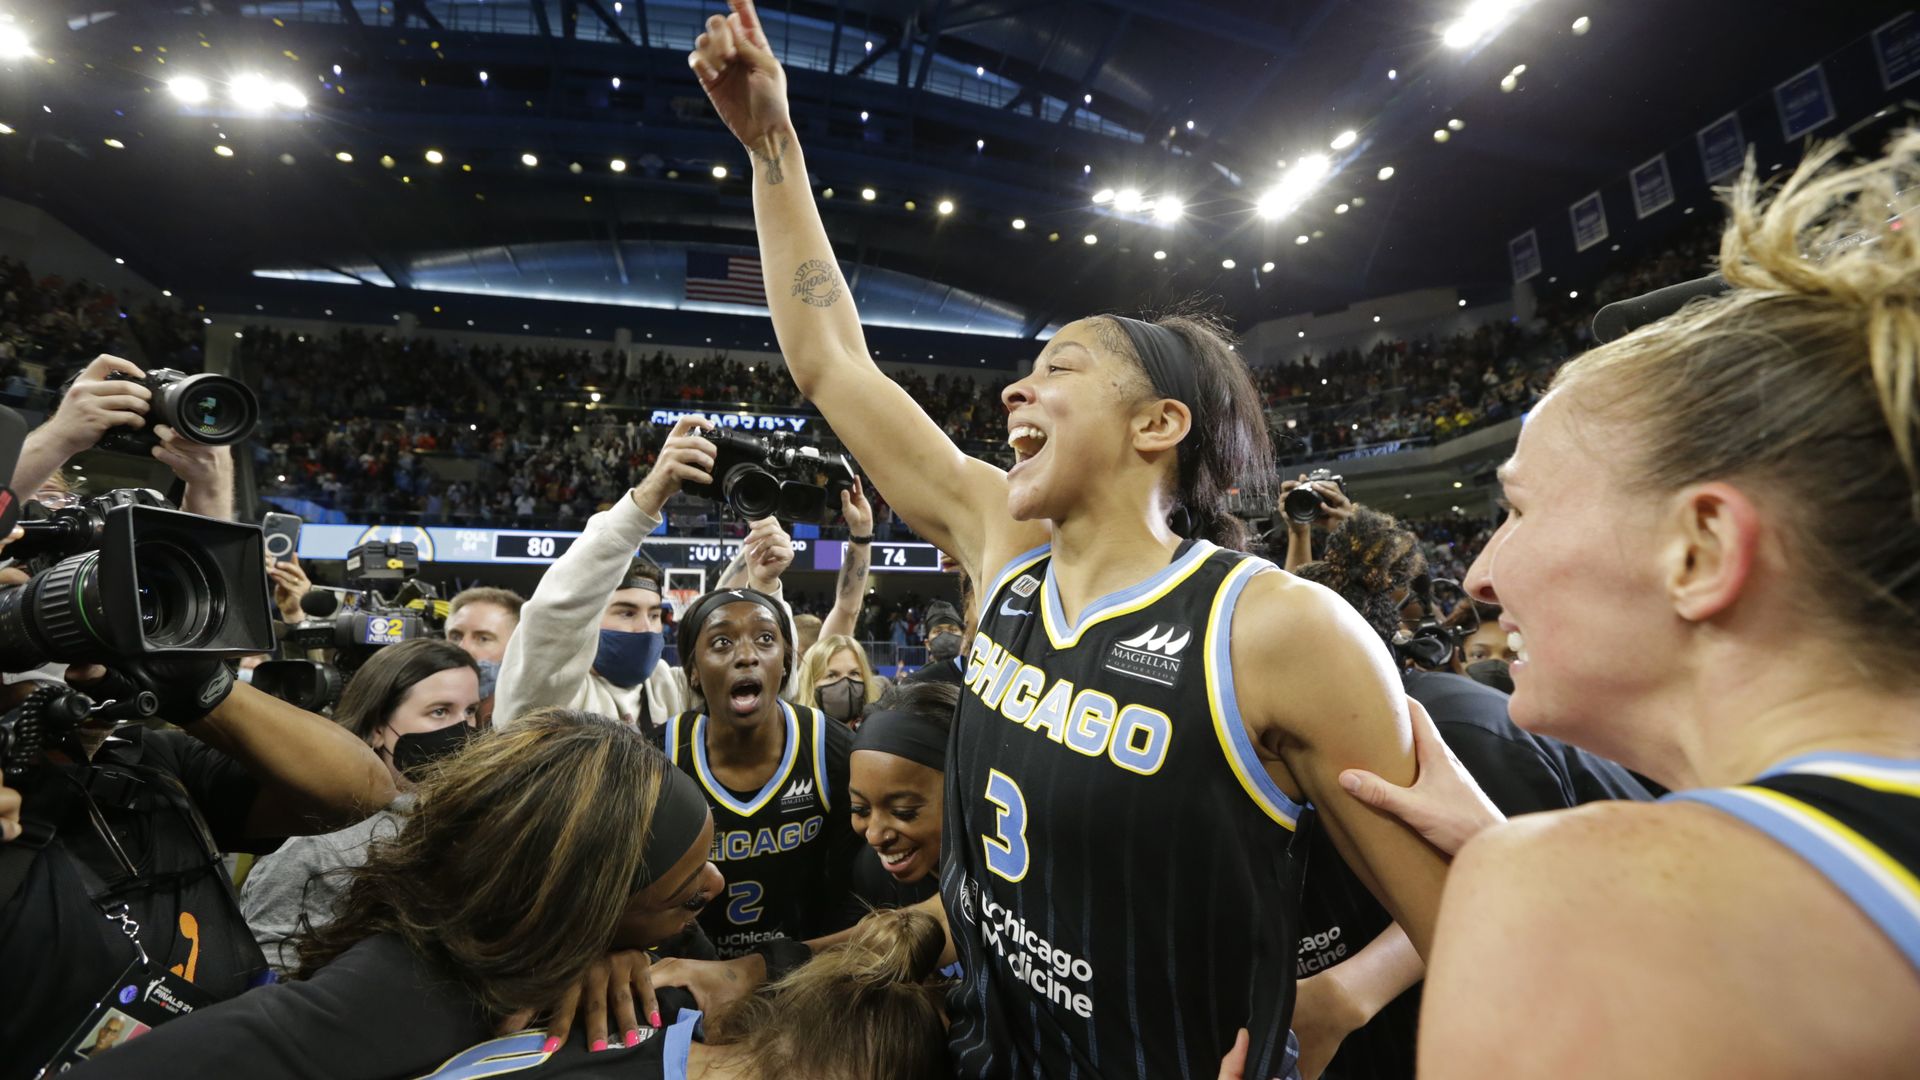 Photo of a woman celebrating on the court after winning a basketball championship.